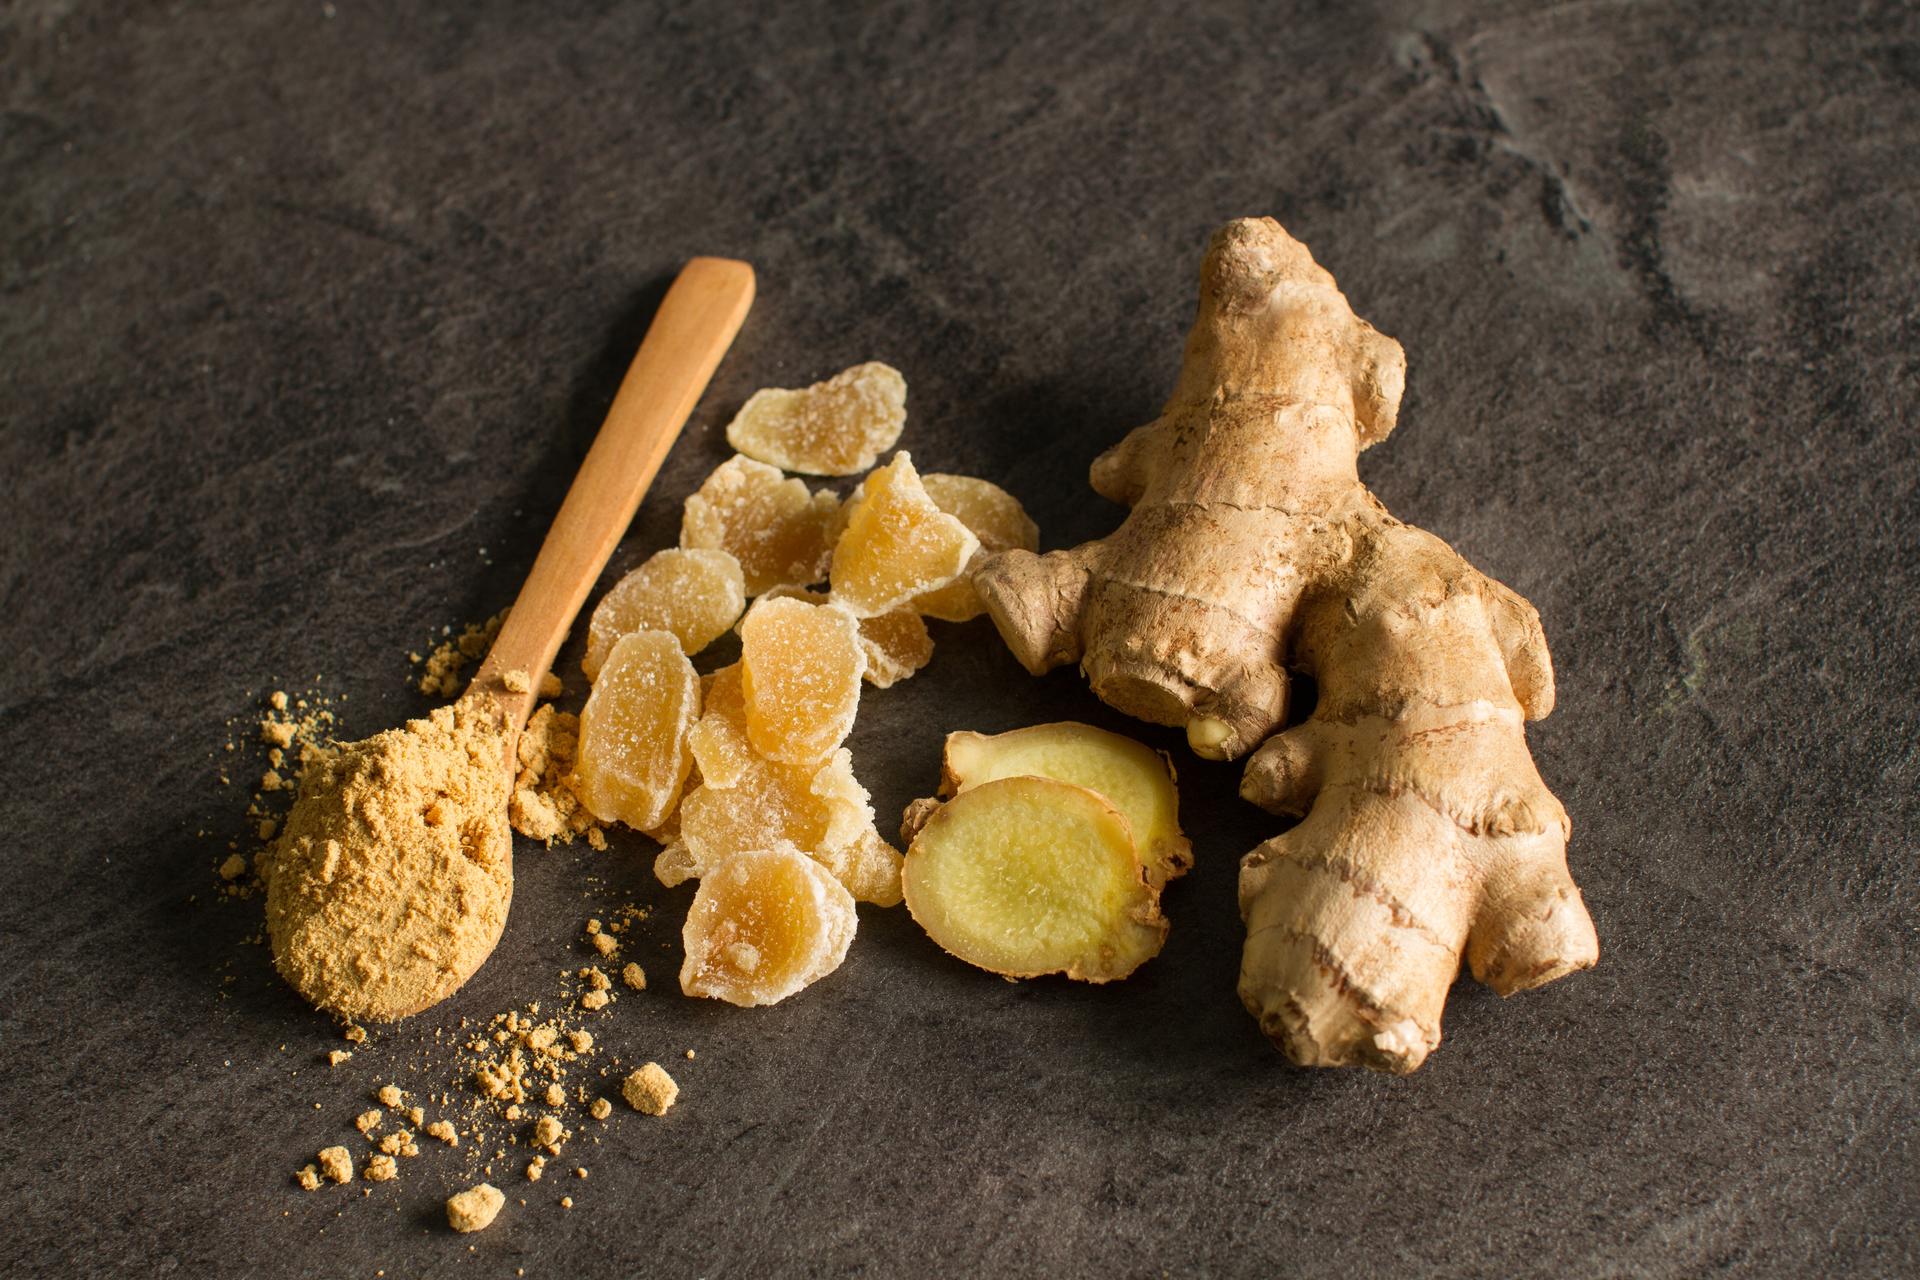 Ginger herbs and spices for weight loss